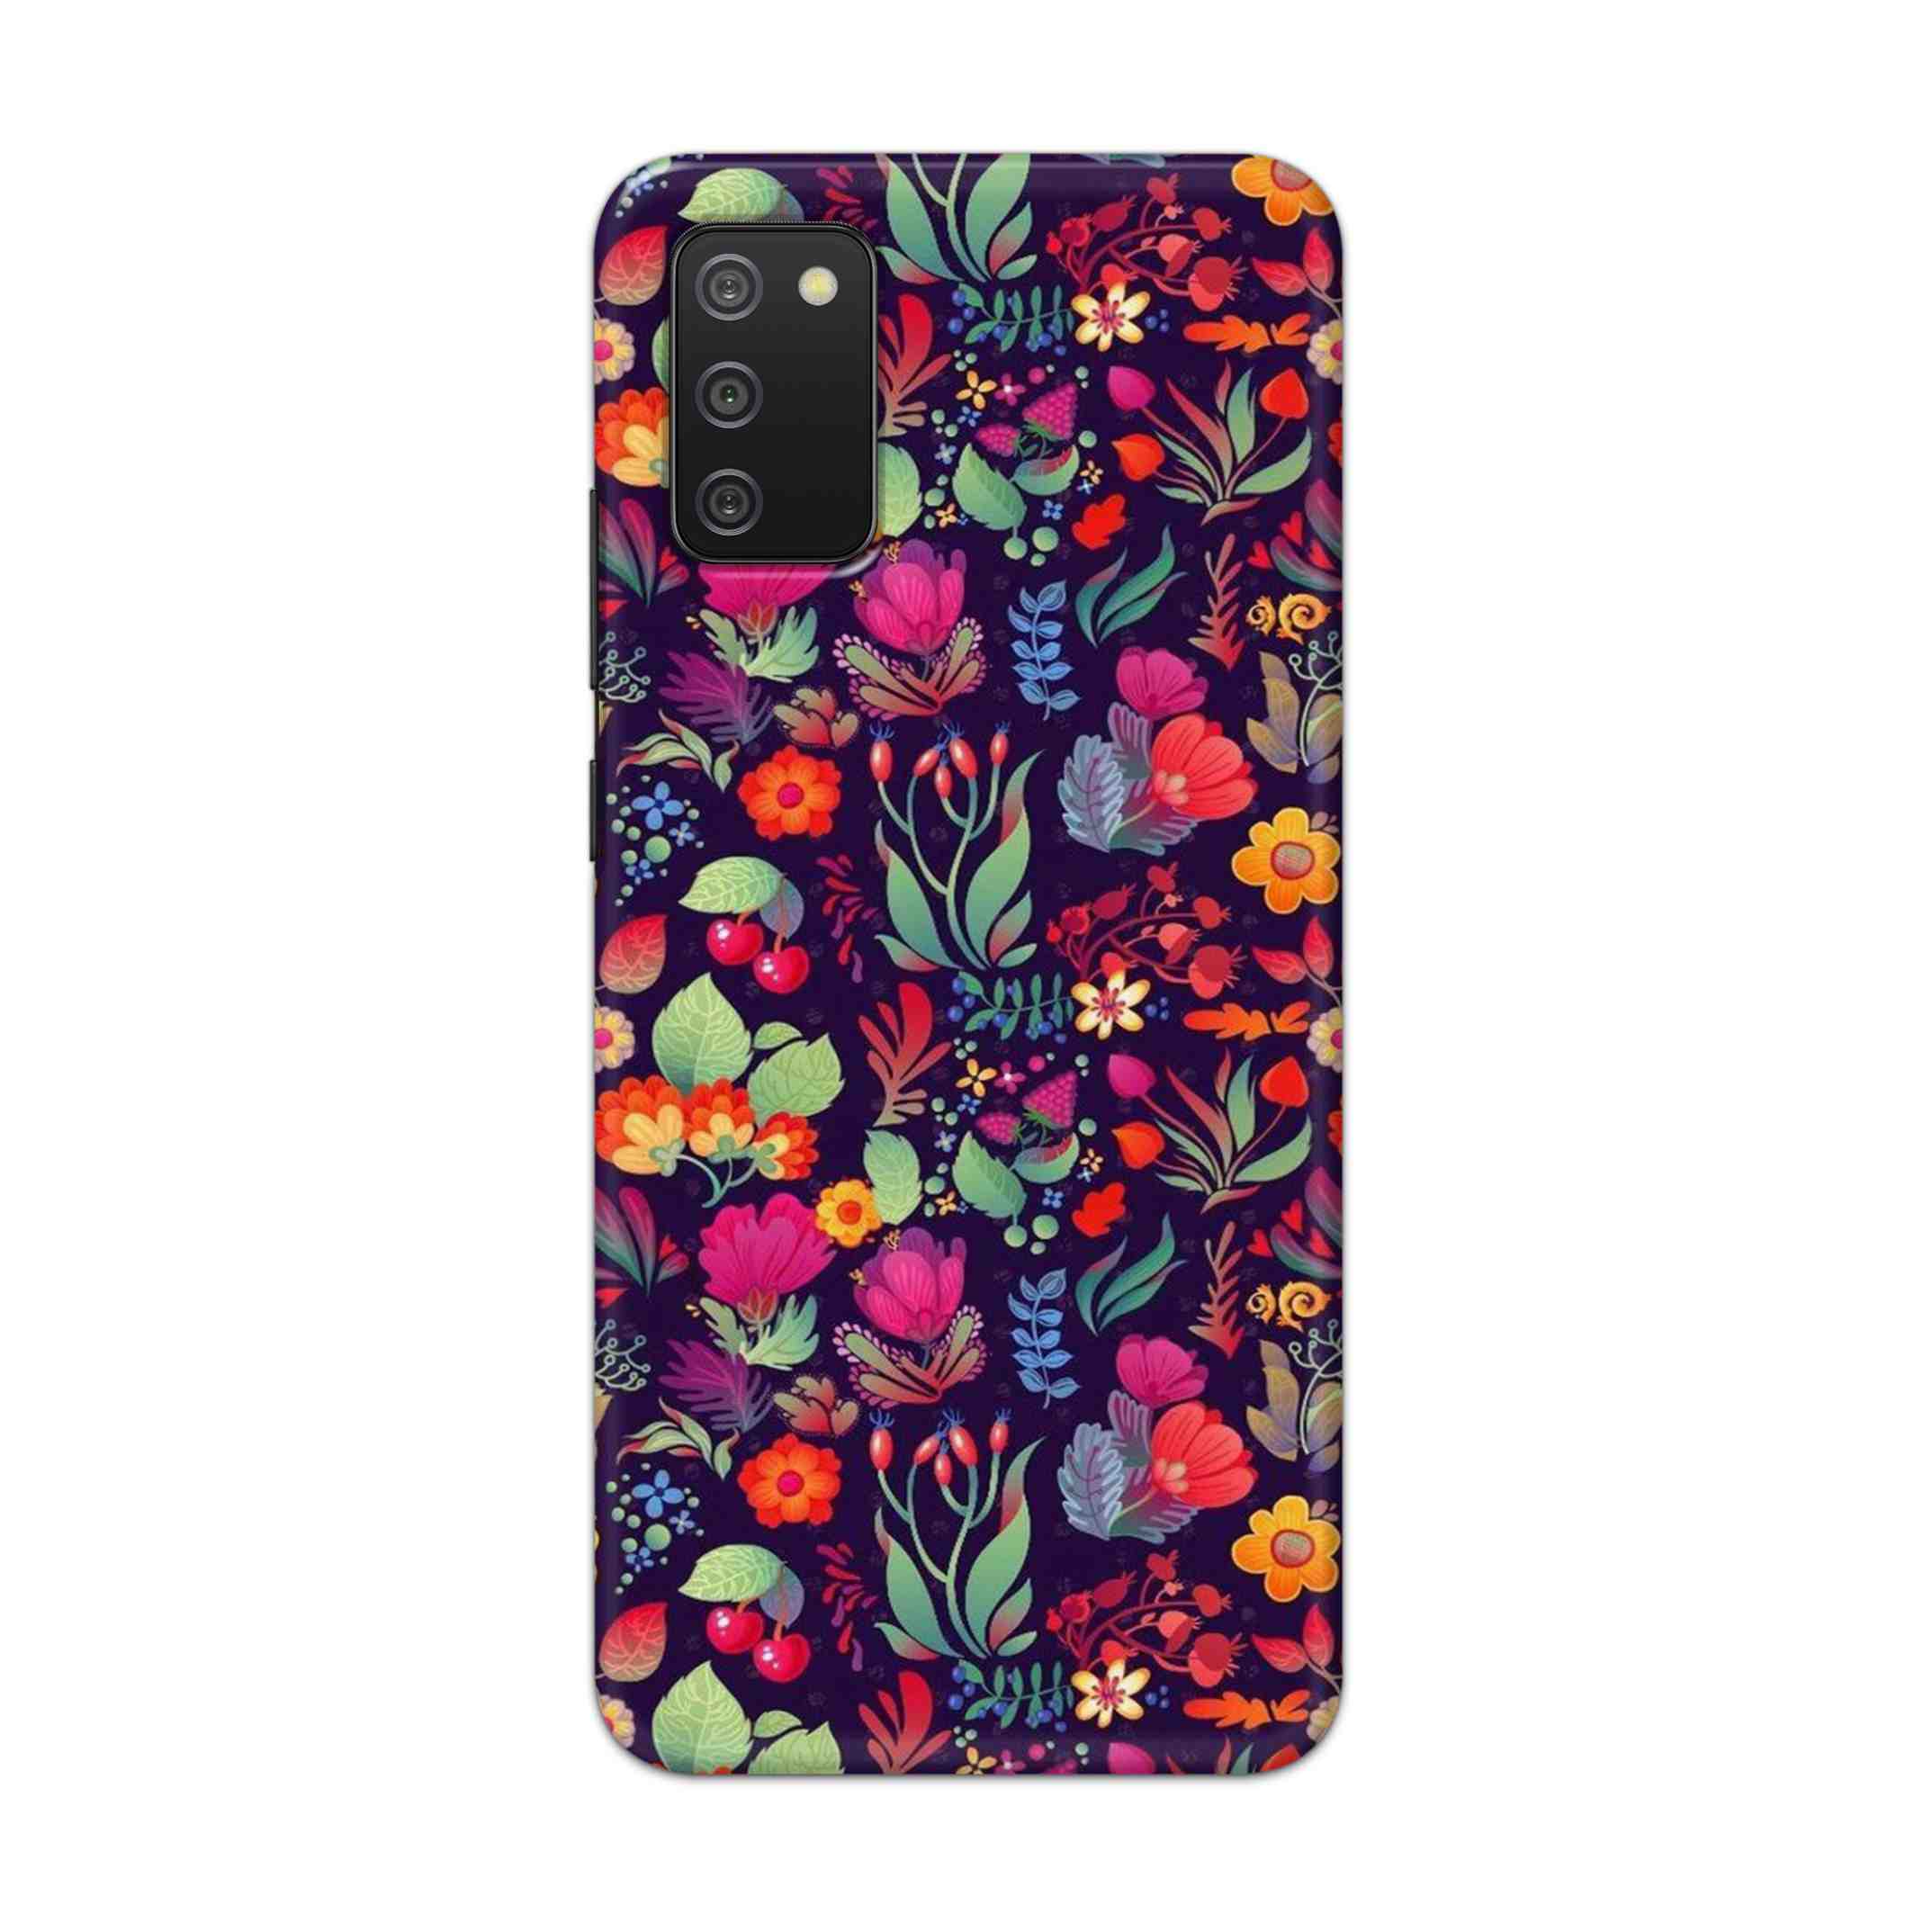 Buy Fruits Flower Hard Back Mobile Phone Case Cover For Samsung Galaxy M02s Online